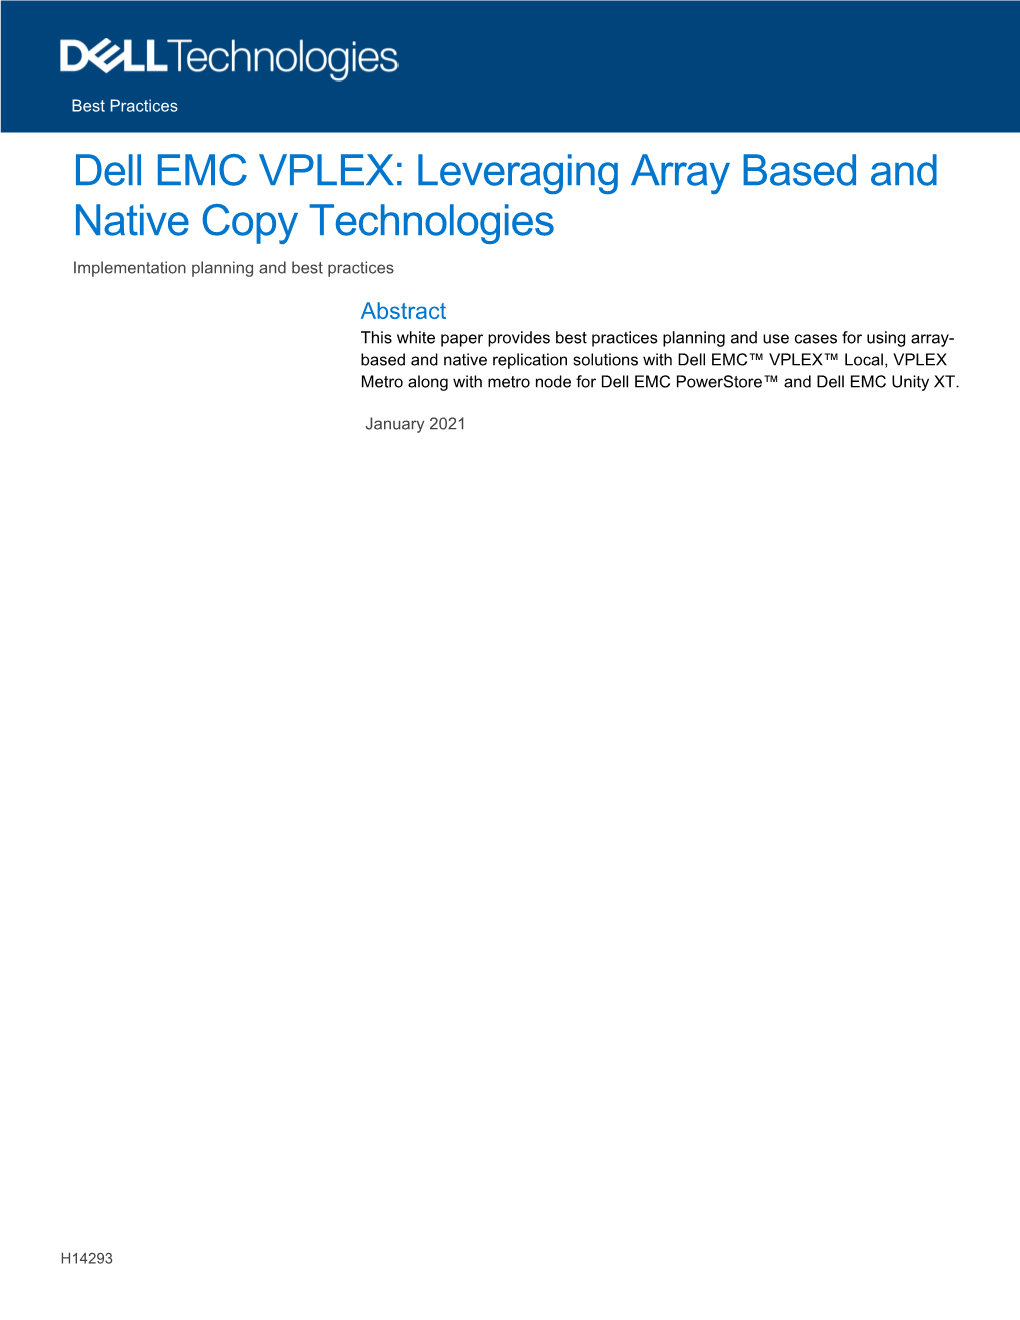 Dell EMC VPLEX: Leveraging Array Based and Native Copy Technologies Implementation Planning and Best Practices